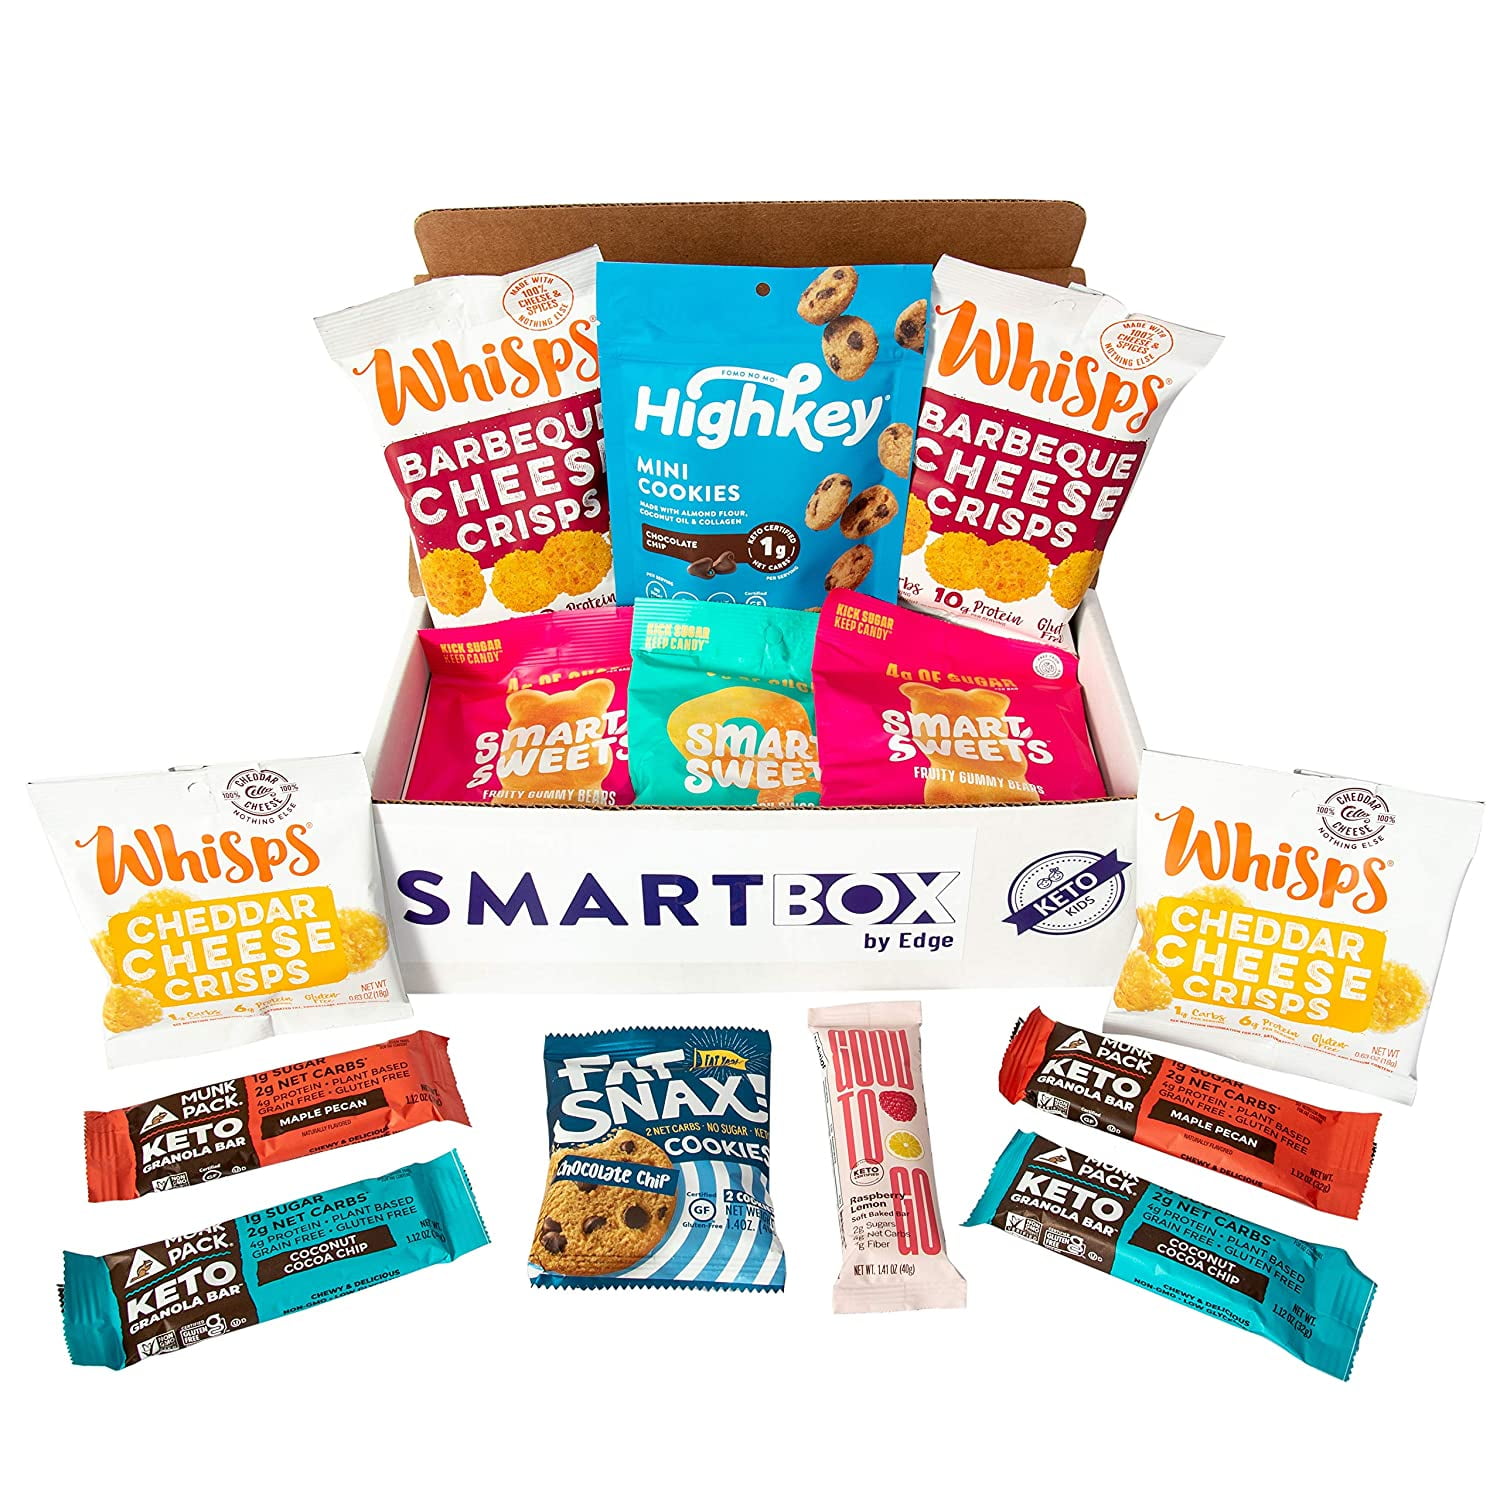 Christmas Snack Box | KETO SNACK BOX - Packed with Low Carb Snacks (4 G or  Less), Low Sugar Snacks (2 G or Less), Gluten Free | HOLIDAY GIFT BASKETS 